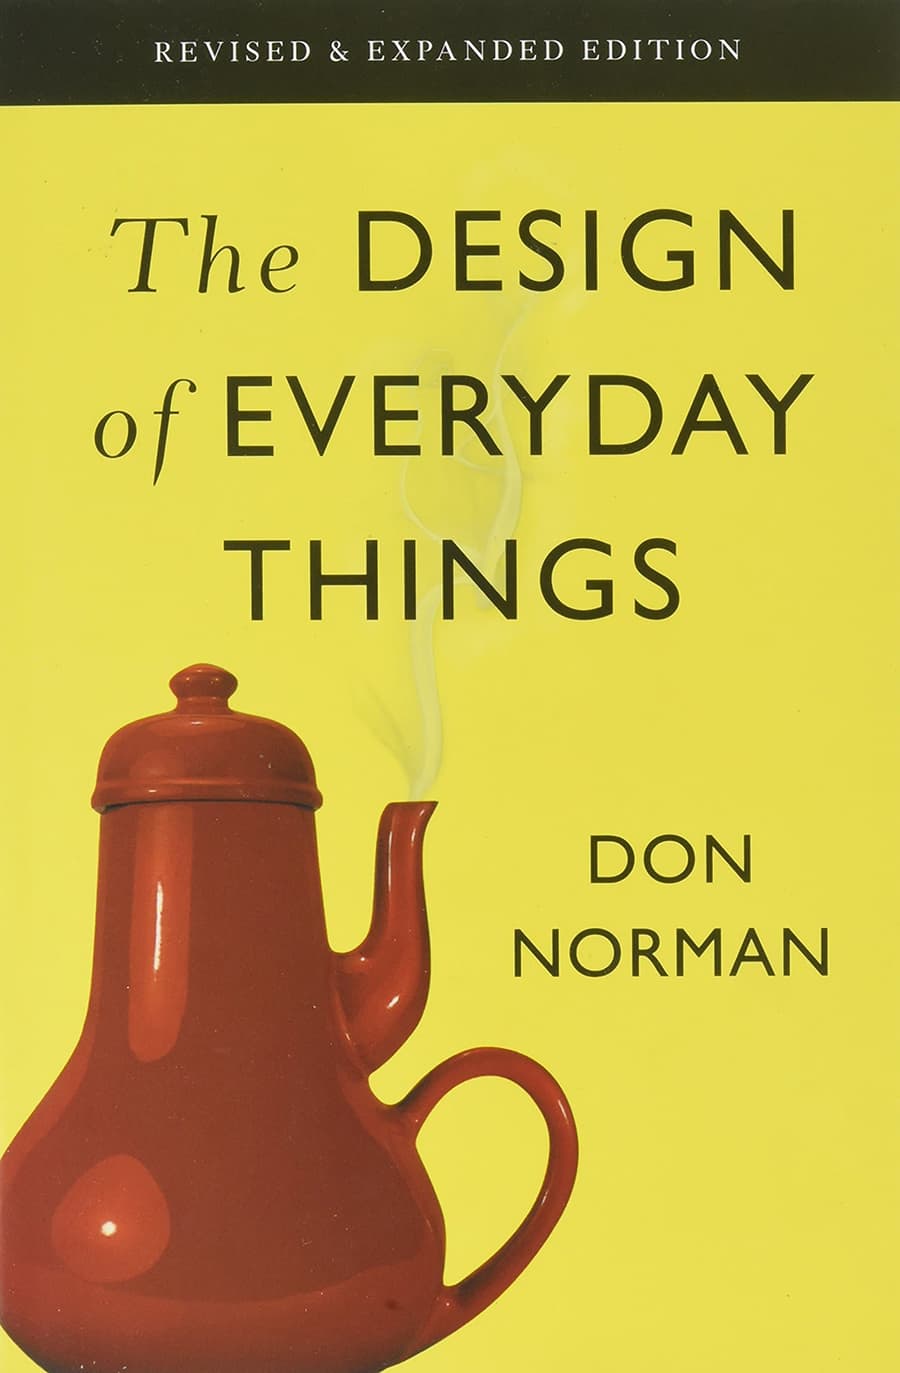 norman don the design of everyday things